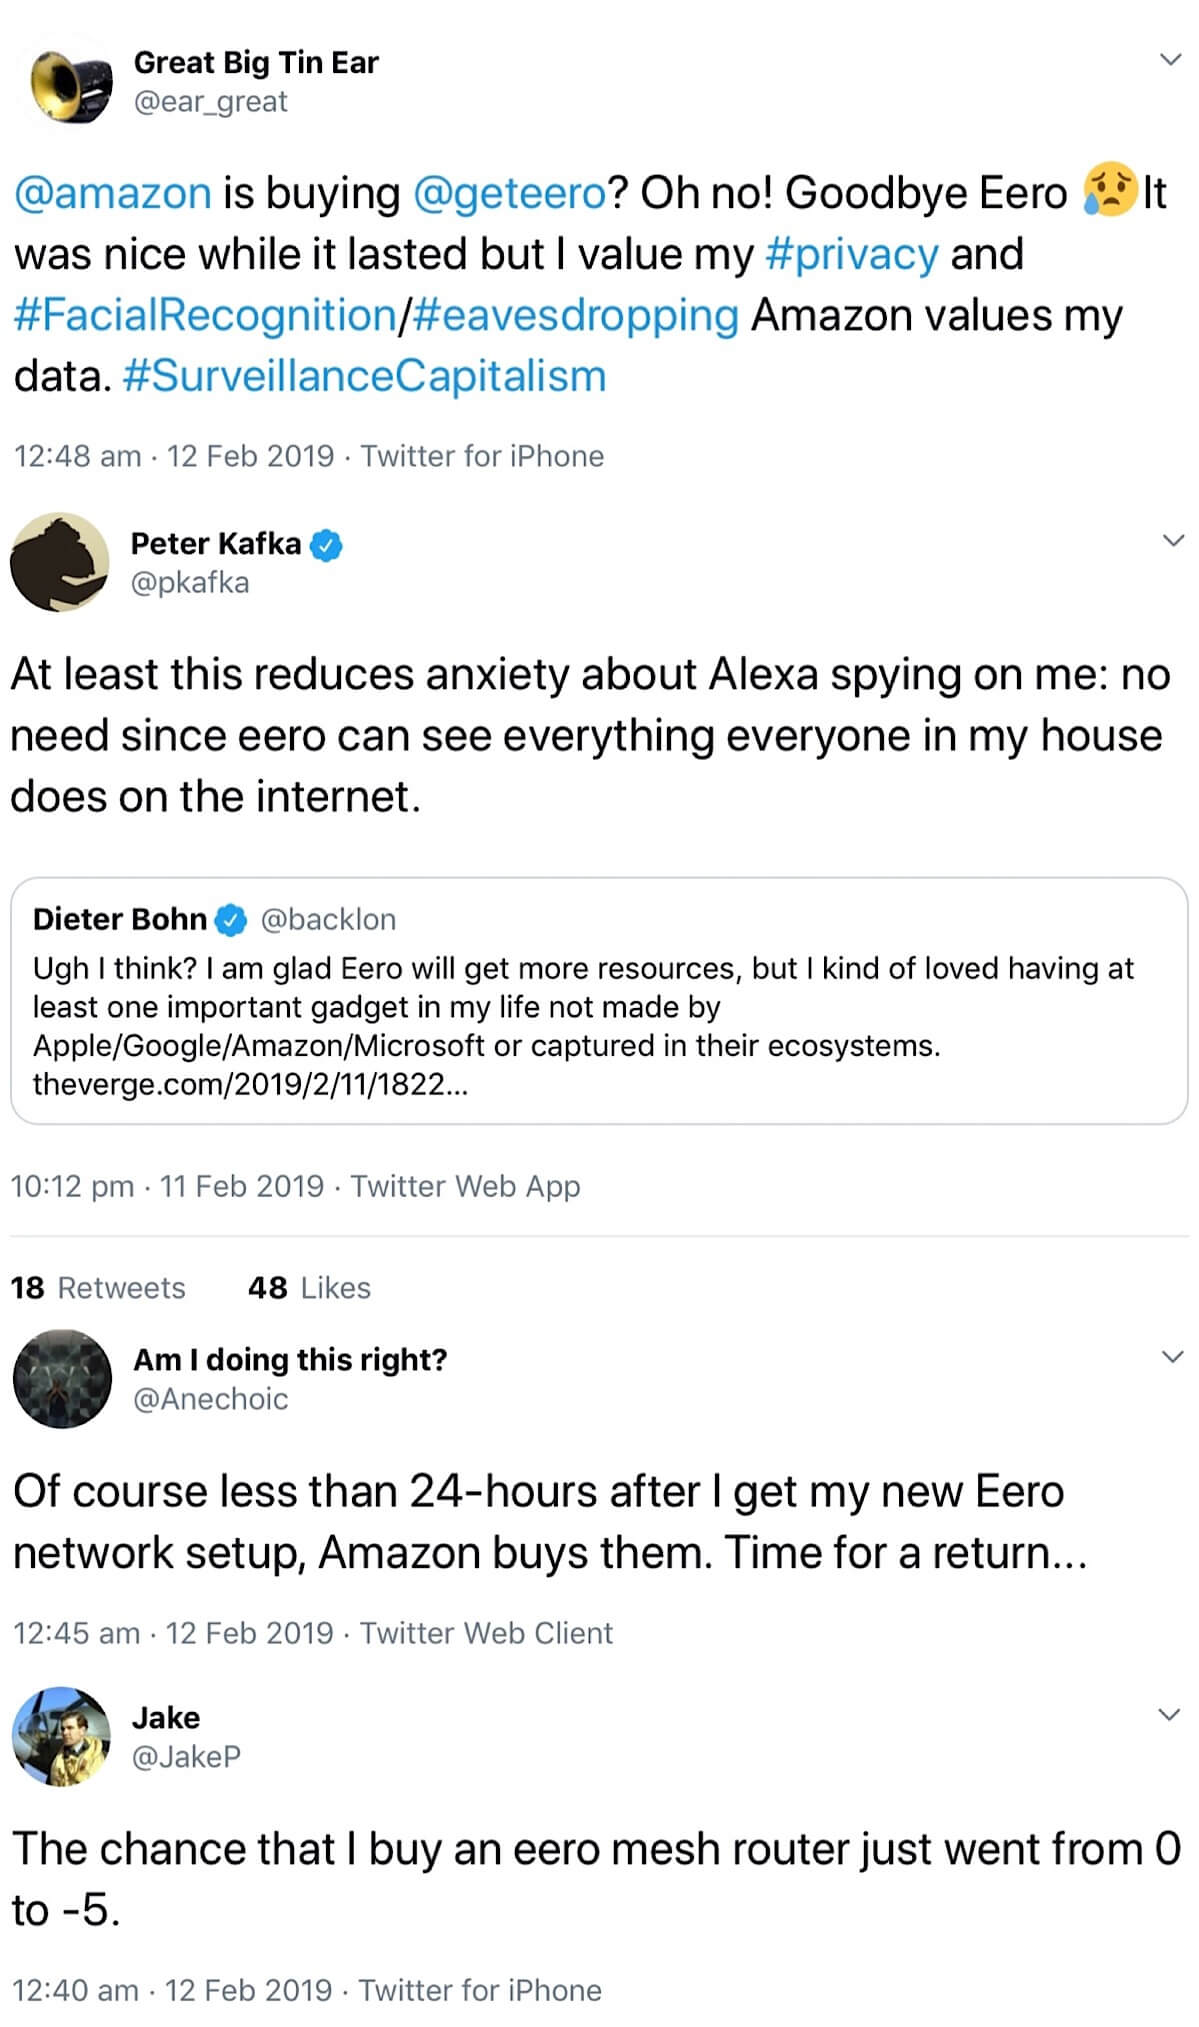 A screenshot of various tweets reacting to the news that Amazon is acquiring Eero.